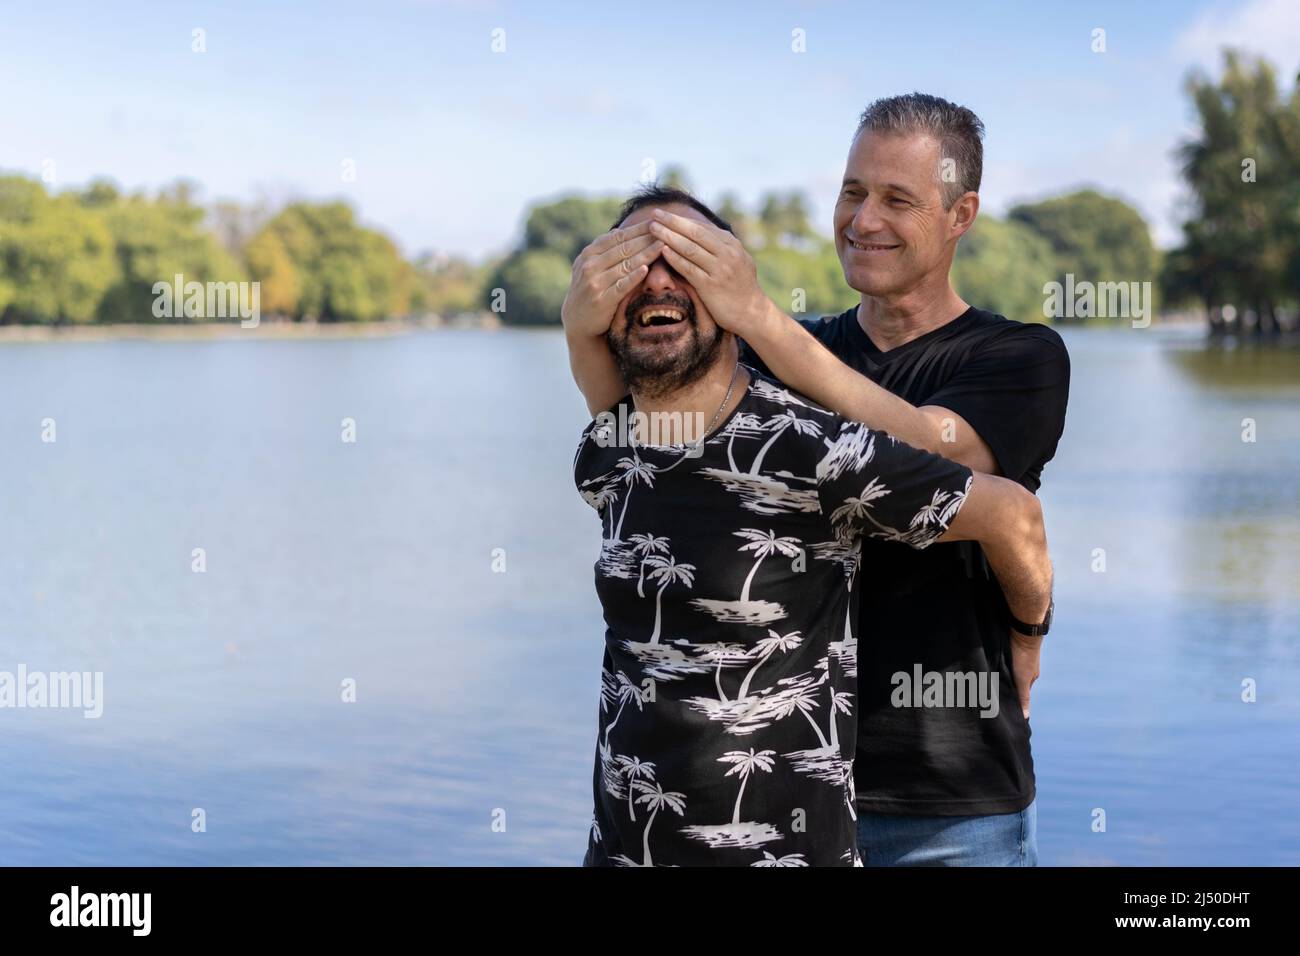 Couple of mature gay men, one surprising the other by covering his eyes in a lake. Concept of surprise, happiness, game Stock Photo